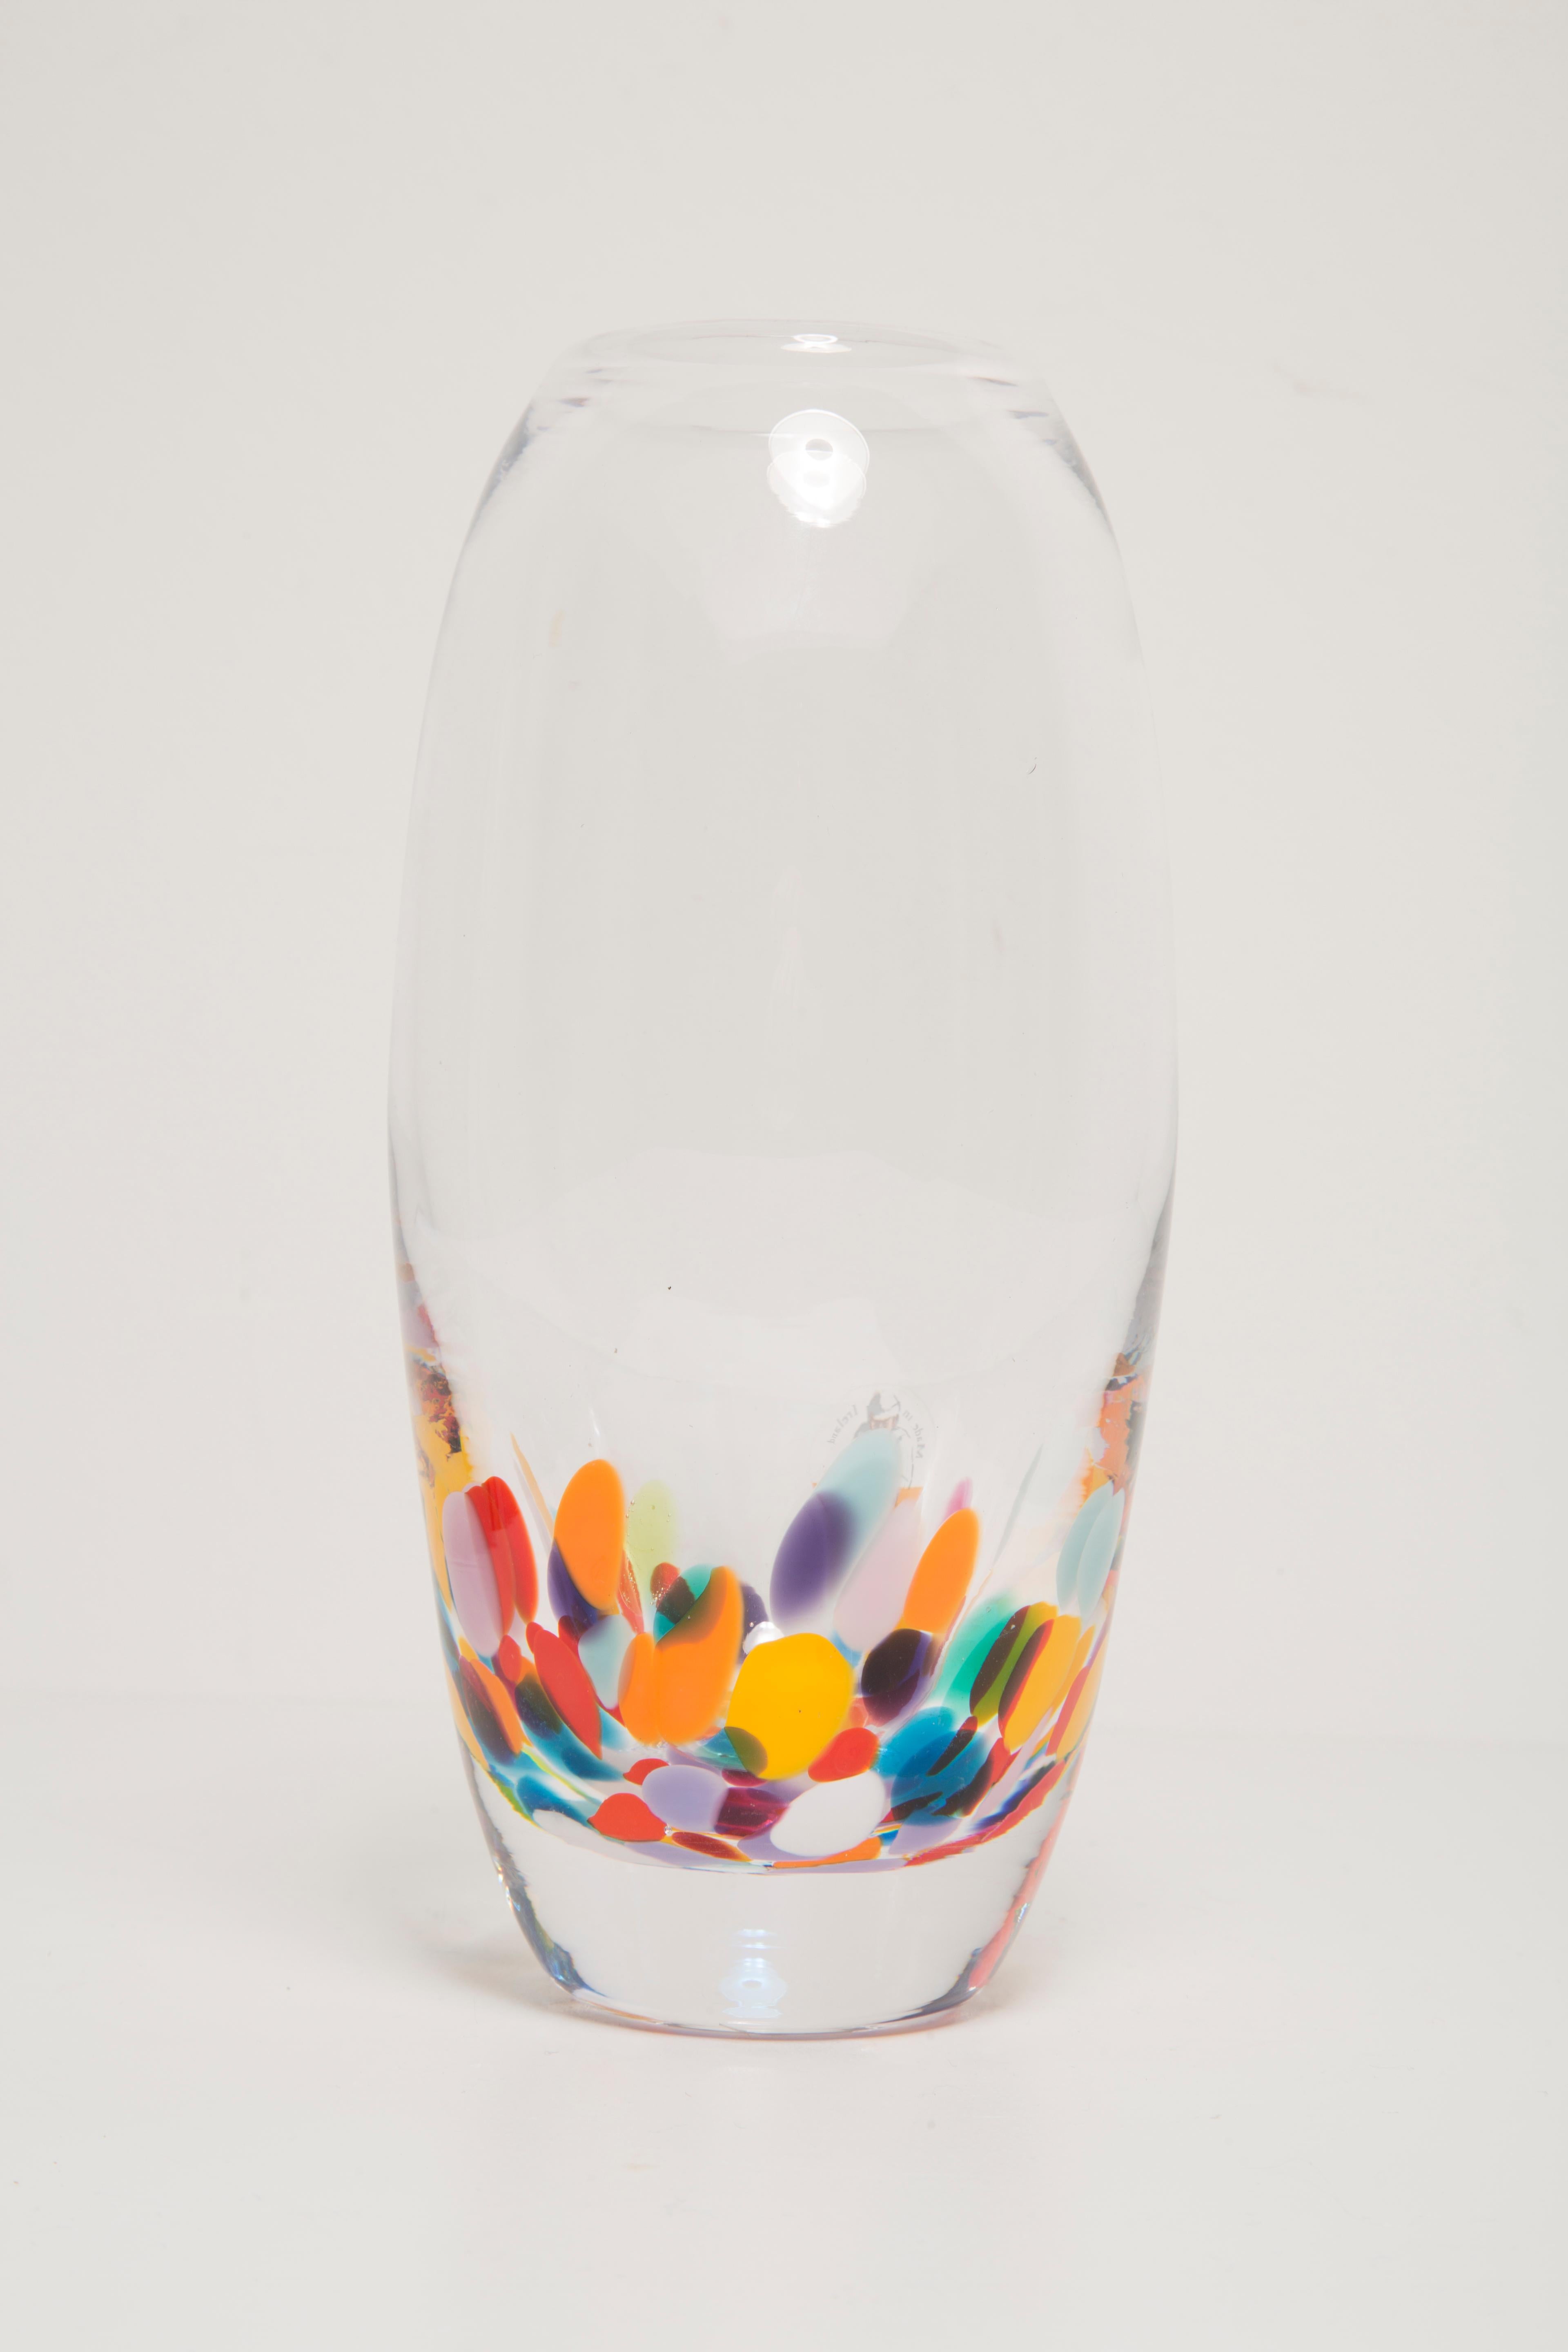 20th Century Mid-Century Vintage Dots Transparent Murano Glass Vase, Jerpoint, Irleand, 2000s For Sale